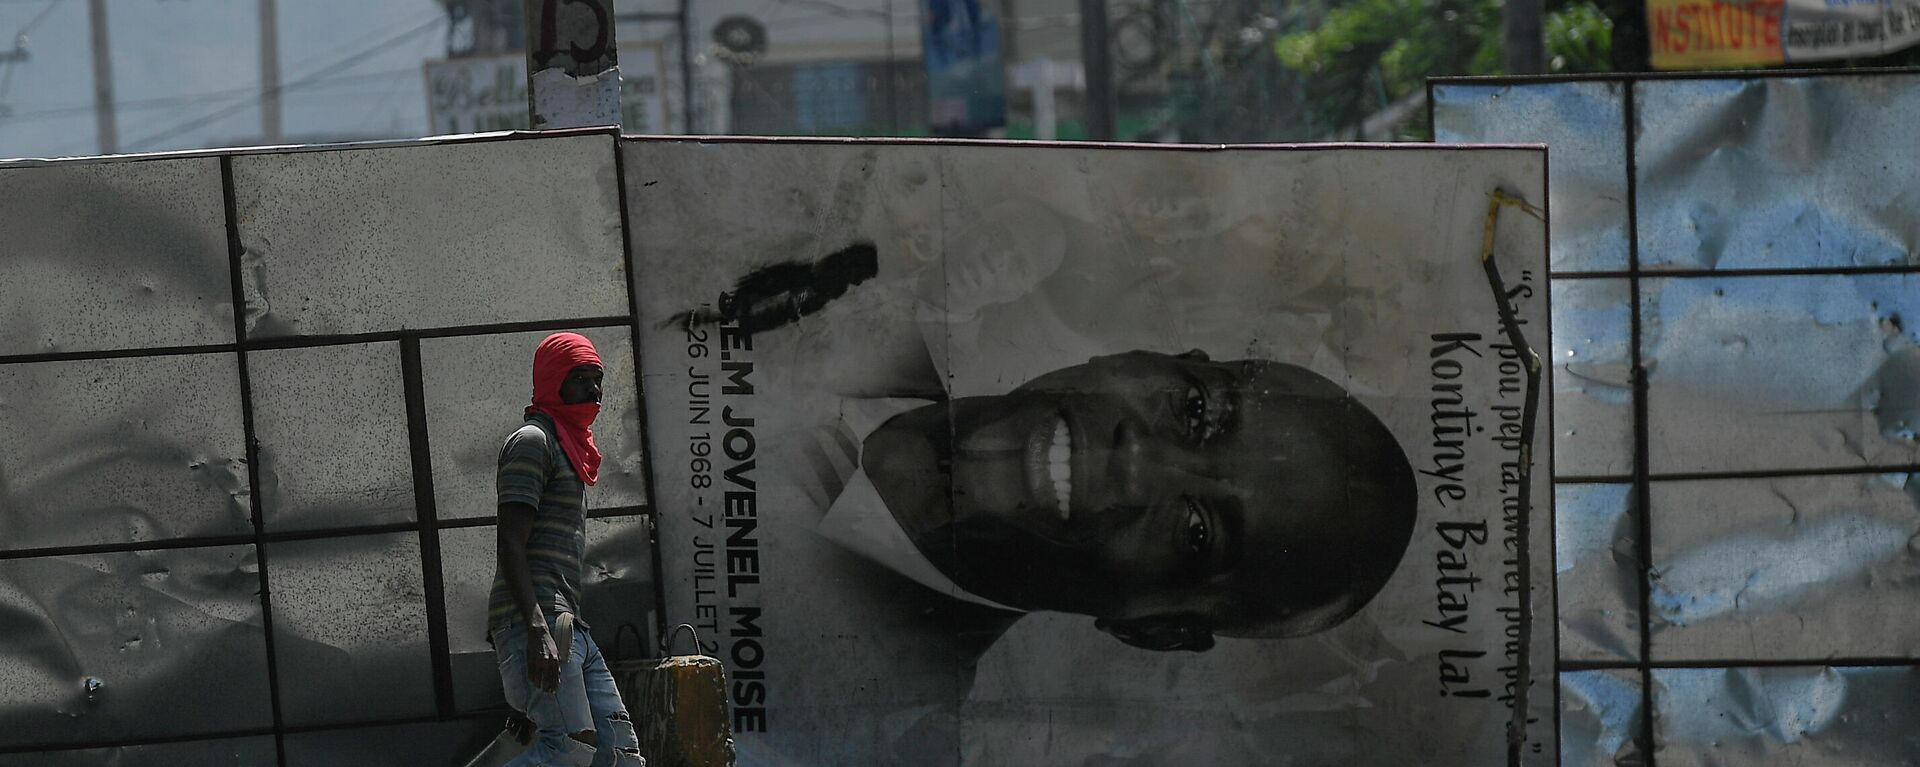 A billboard of slain Haitian President Jovenel Moise is used to block a road during an anti-government protest in Port-au-Prince, Haiti, Thursday, Oct. 21, 2021. - Sputnik International, 1920, 26.04.2022